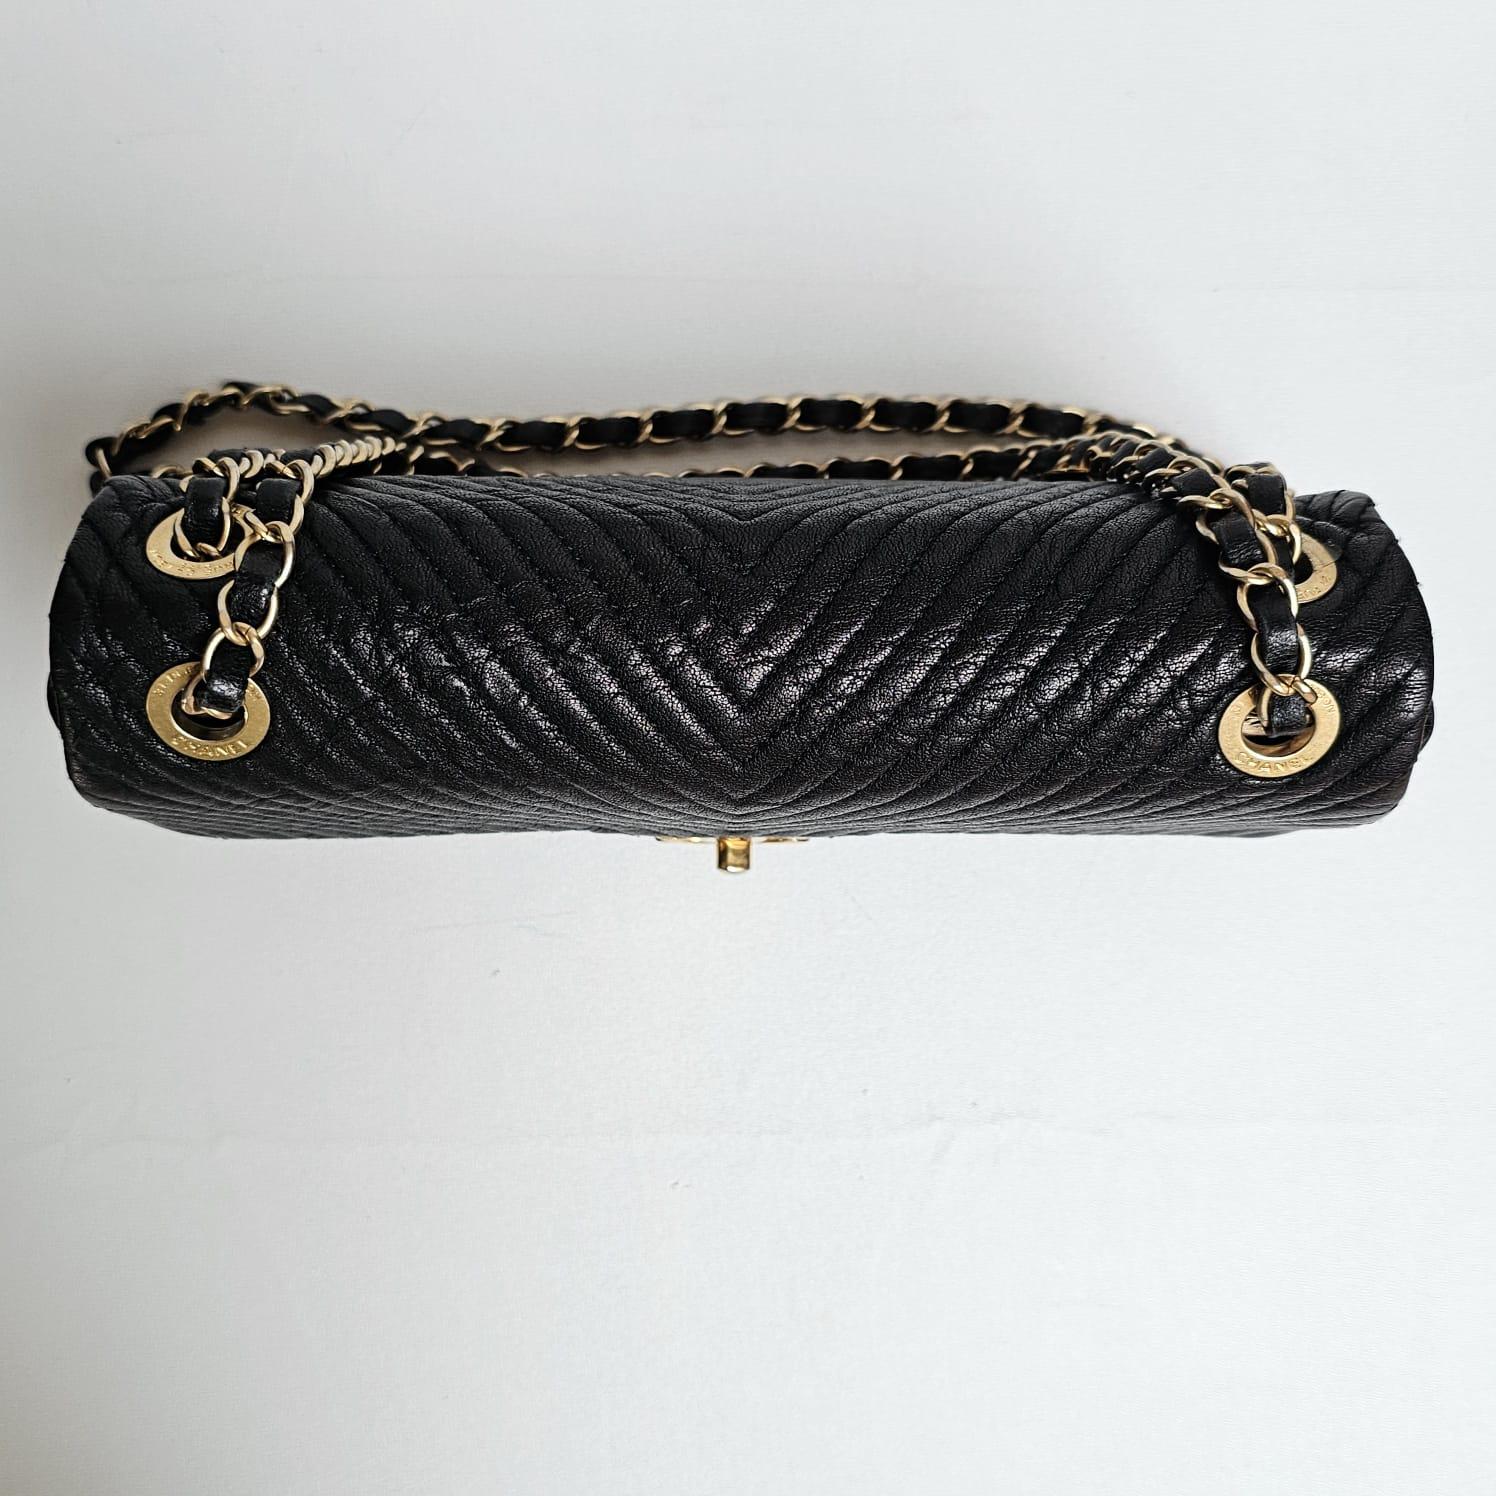 Classic chanel chevron flap bag in black goatskin leather. Slight distressed like leather, light and not easily scratched. Slight wrinkling on the body of the leather due to storage. Faint scuffing on the hardware turn lock due to wear. Overall in